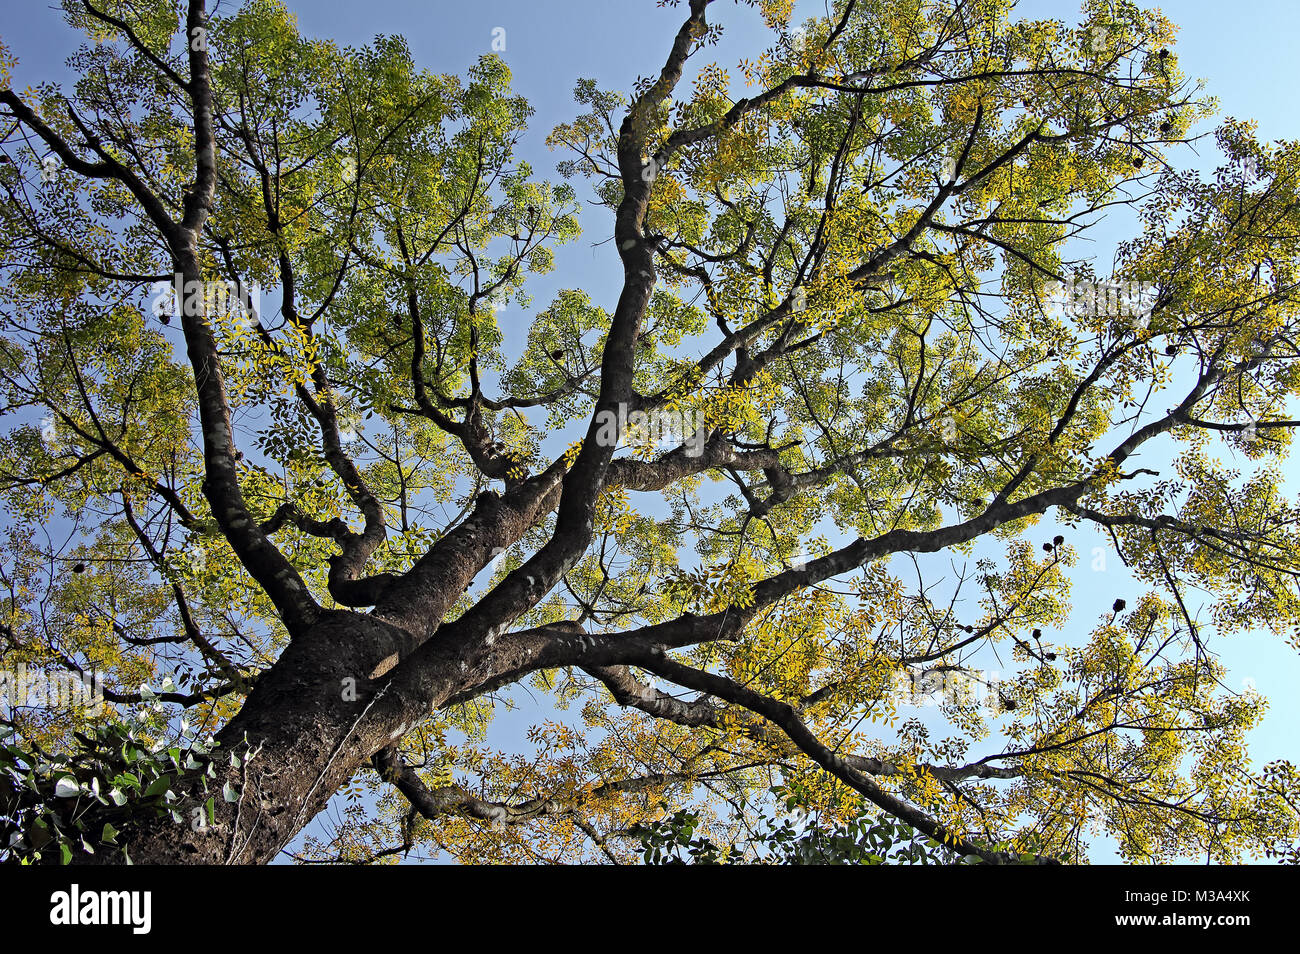 Canopy of mahogany tree with colorful autumn leaves, viewed from ground level against bright blue sky, in Kerala, India. Stock Photo